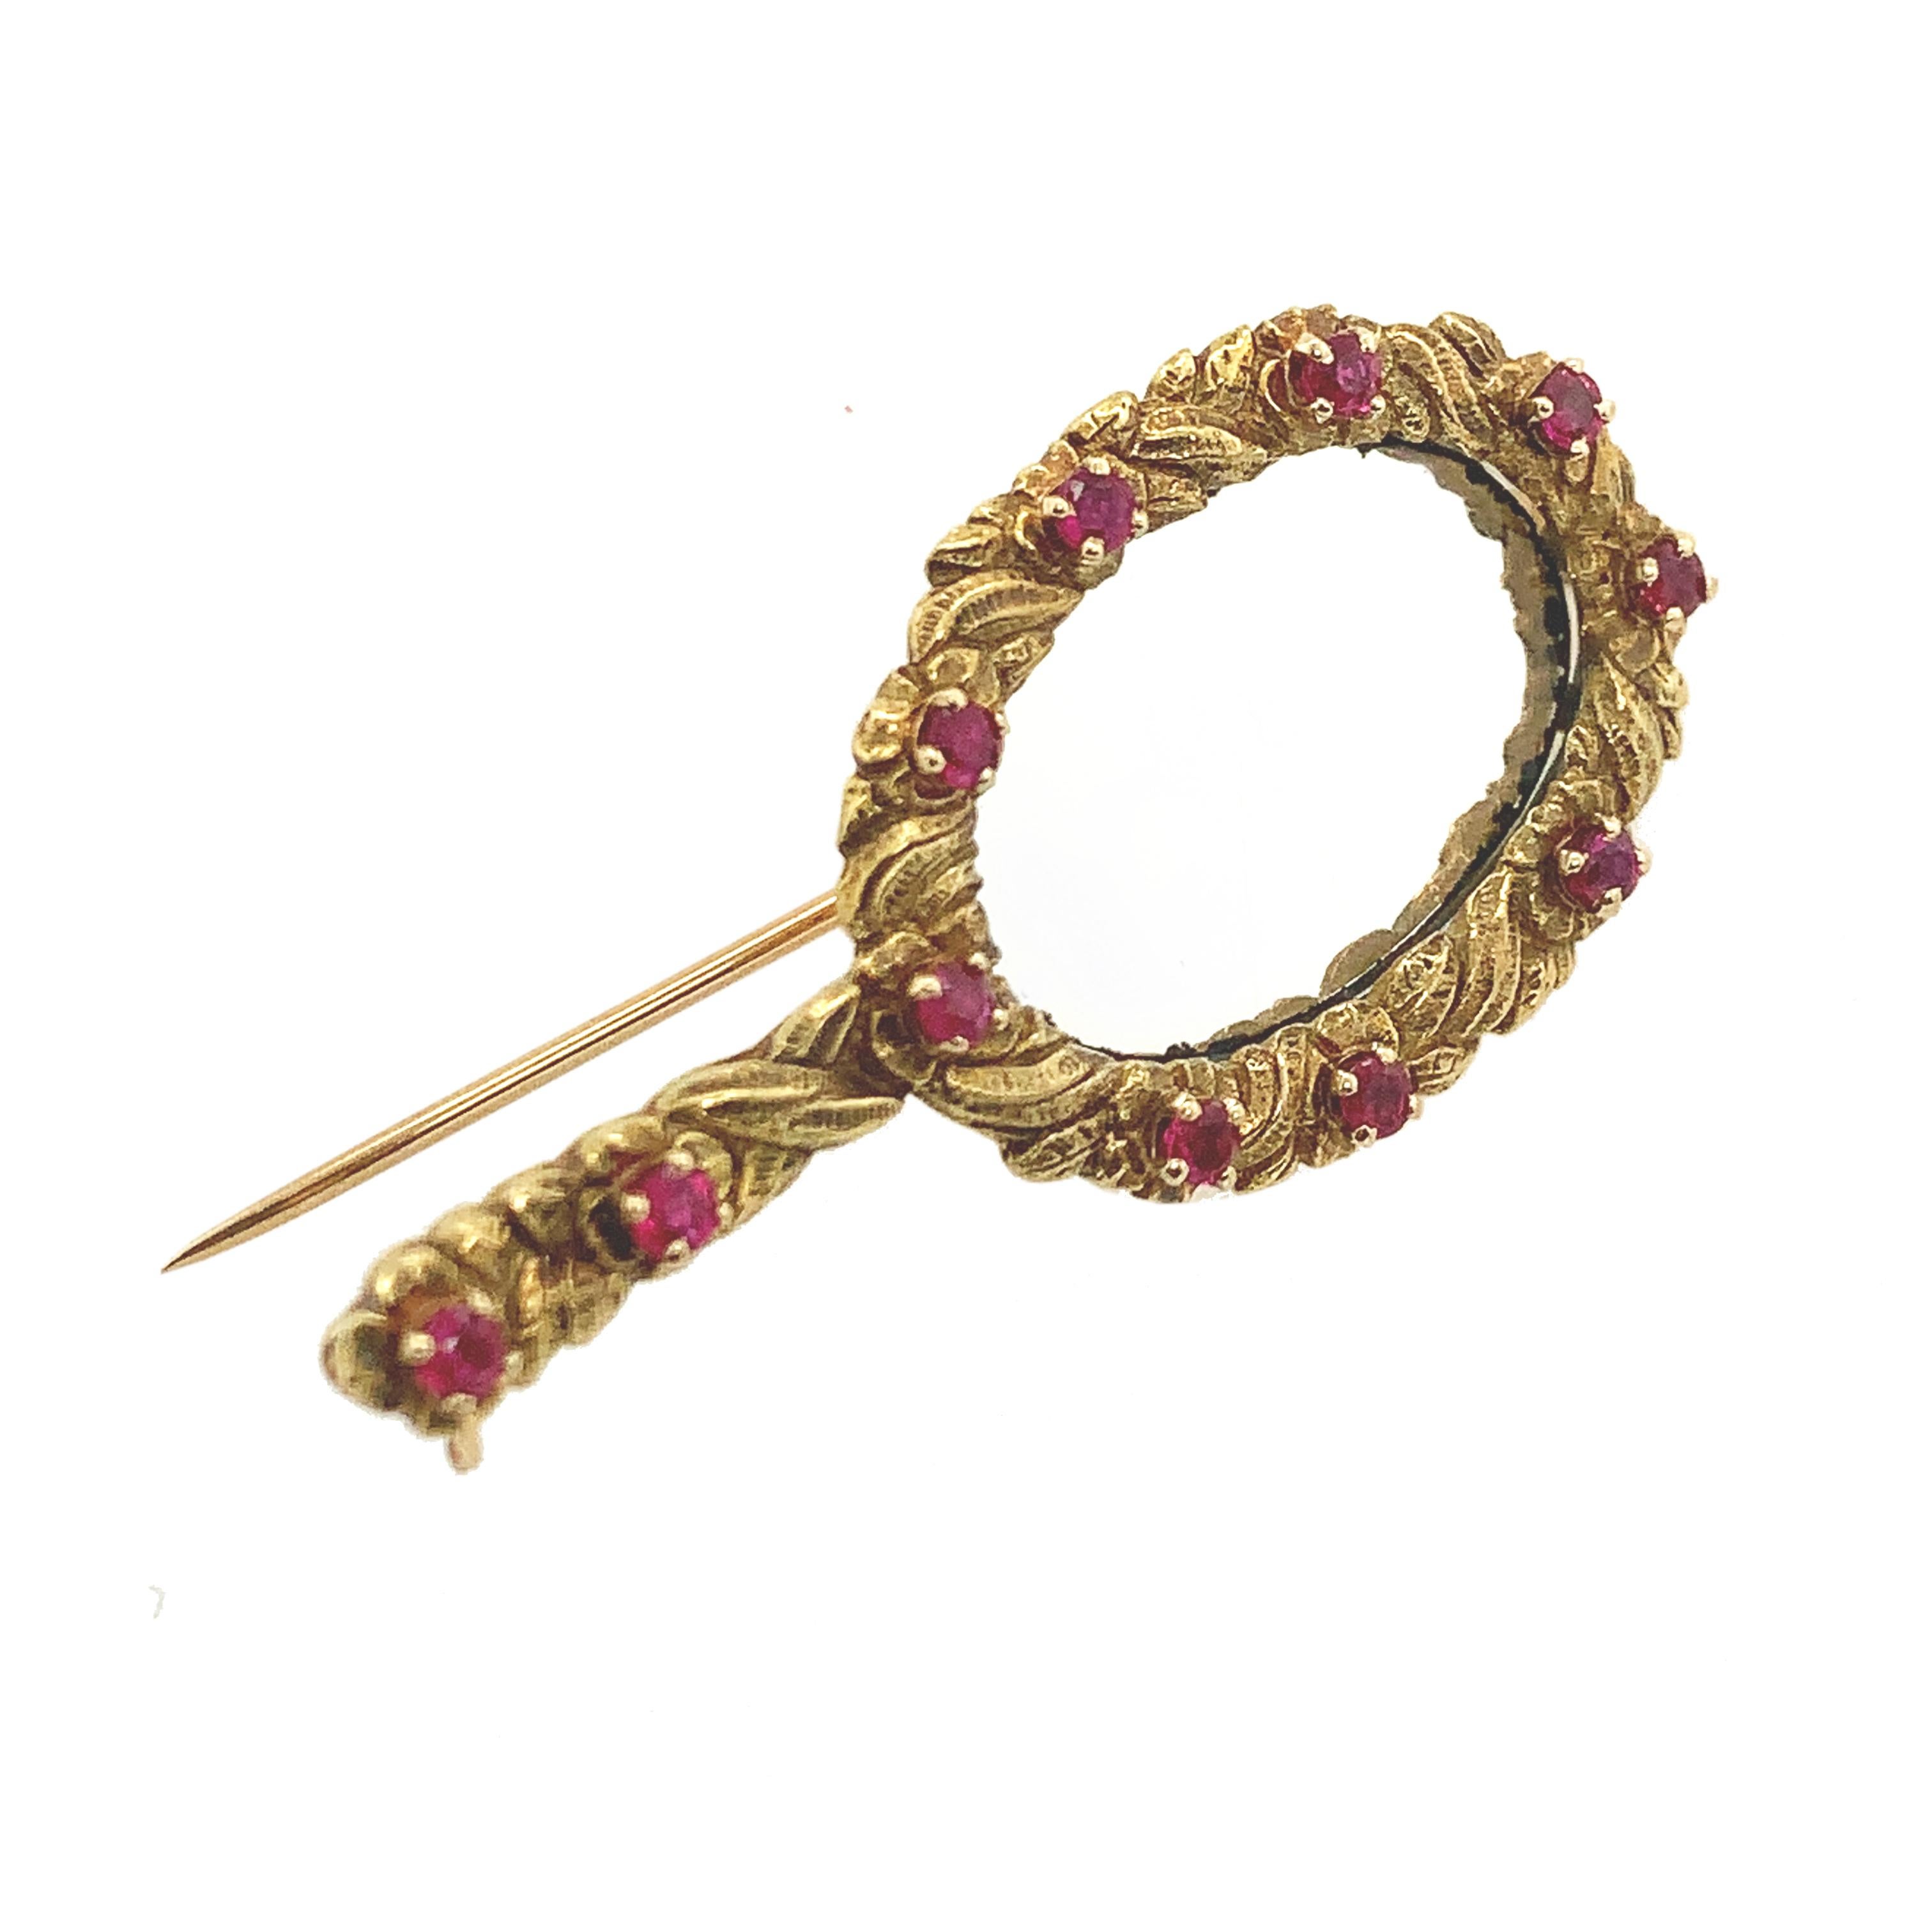 Brilliant Cut Mirror Pin Featuring rubies For Sale